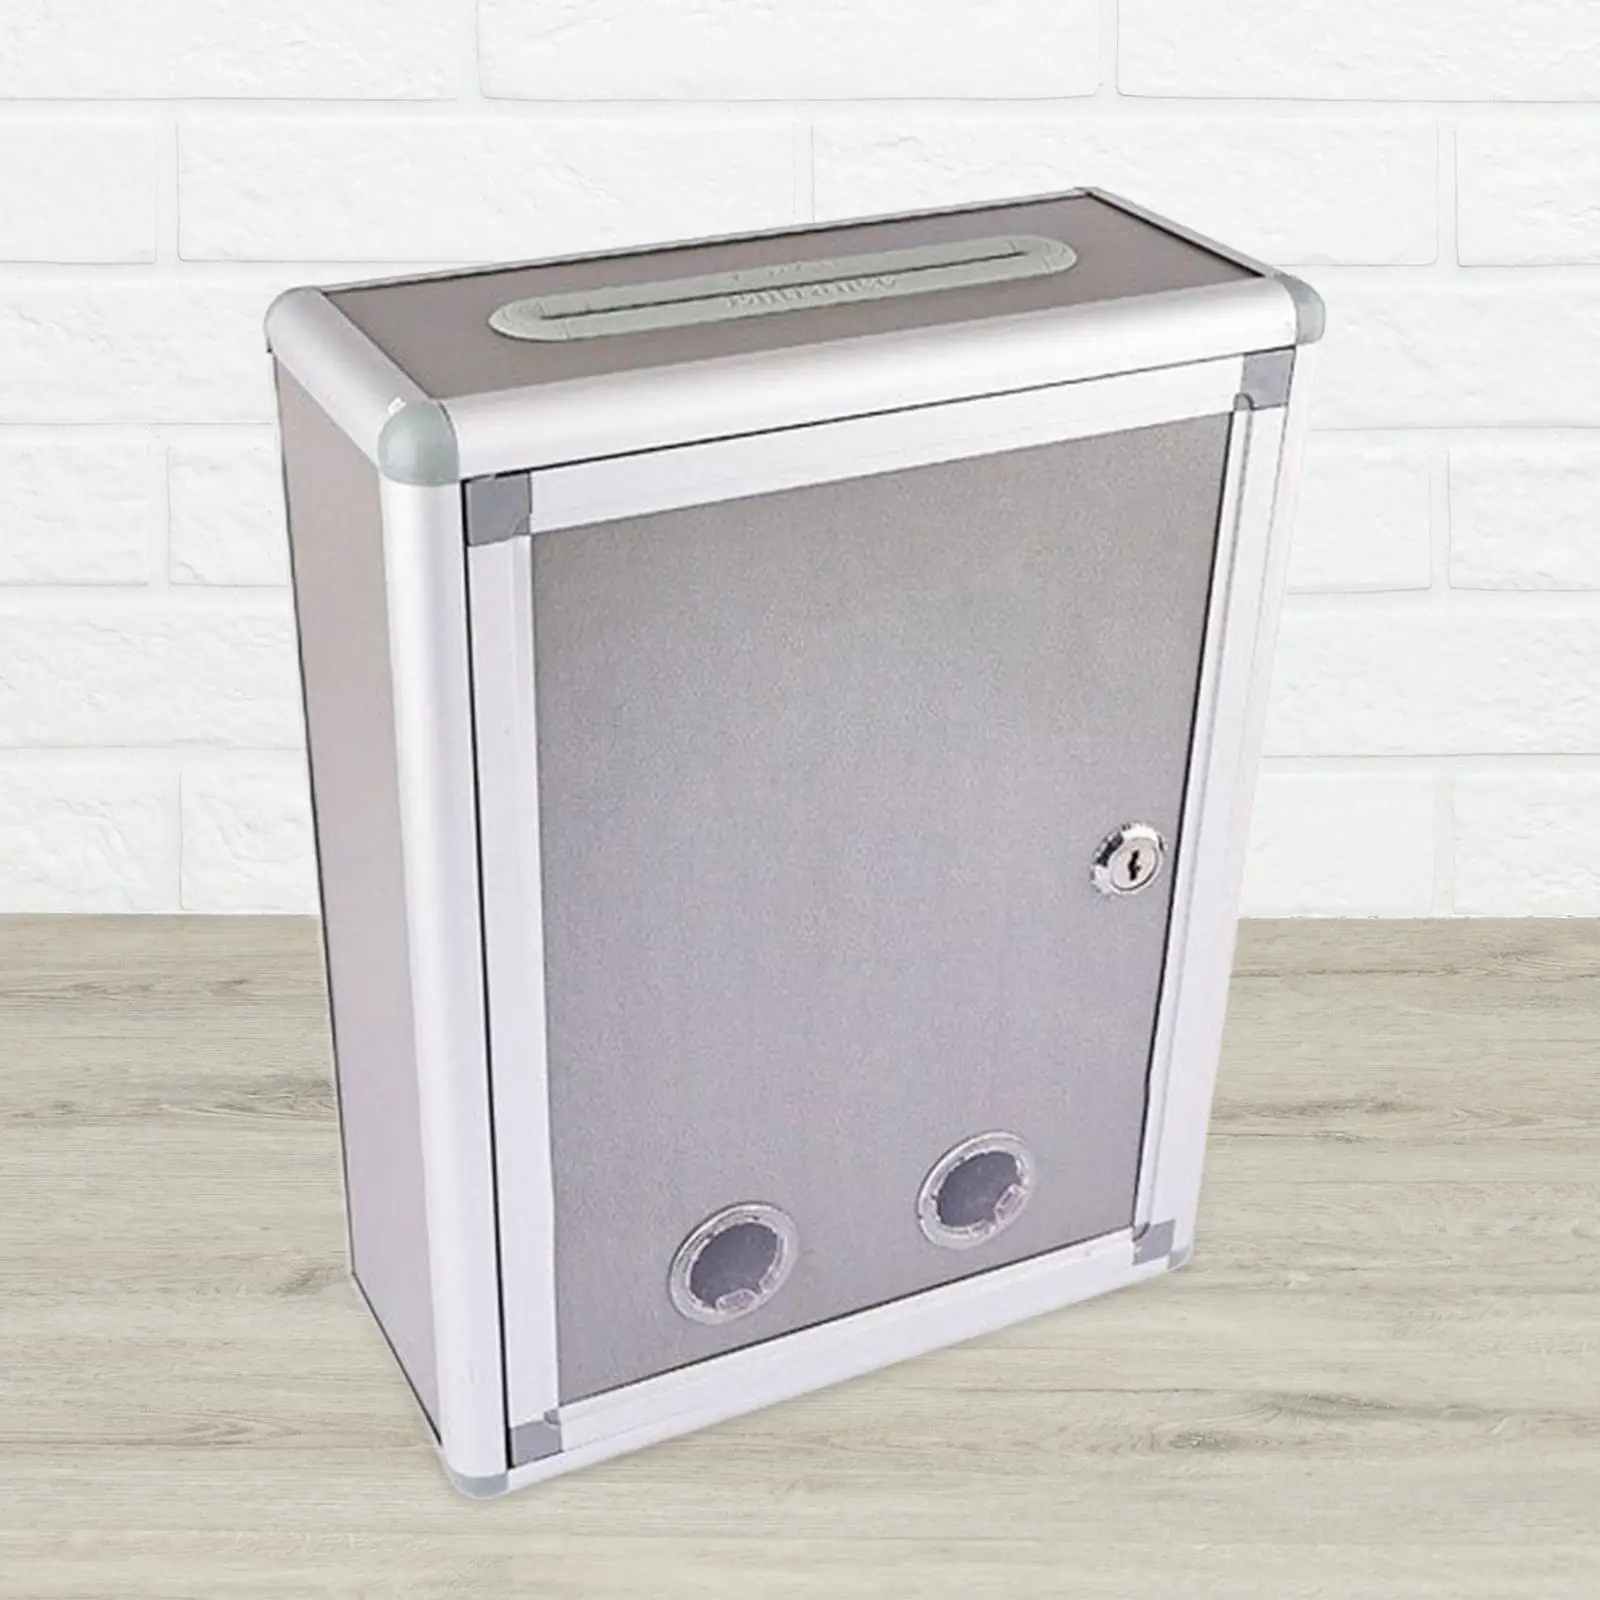 Lockable mailbox for wall mounting, mailbox with key lock, outdoor durable key